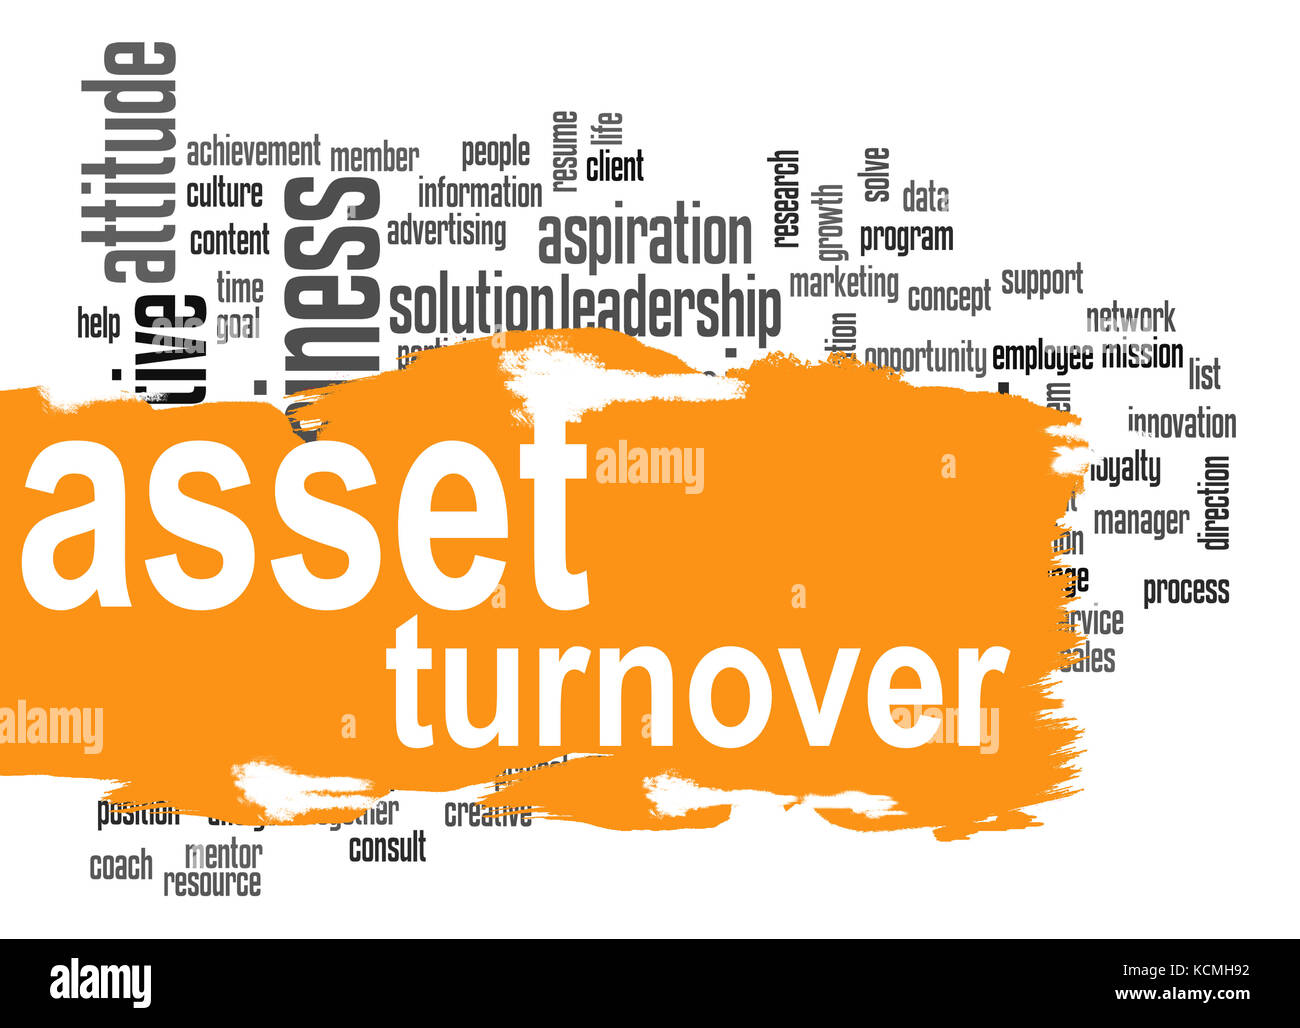 Asset turnover word cloud with orange banner image with hi-res rendered artwork that could be used for any graphic design. Stock Photo